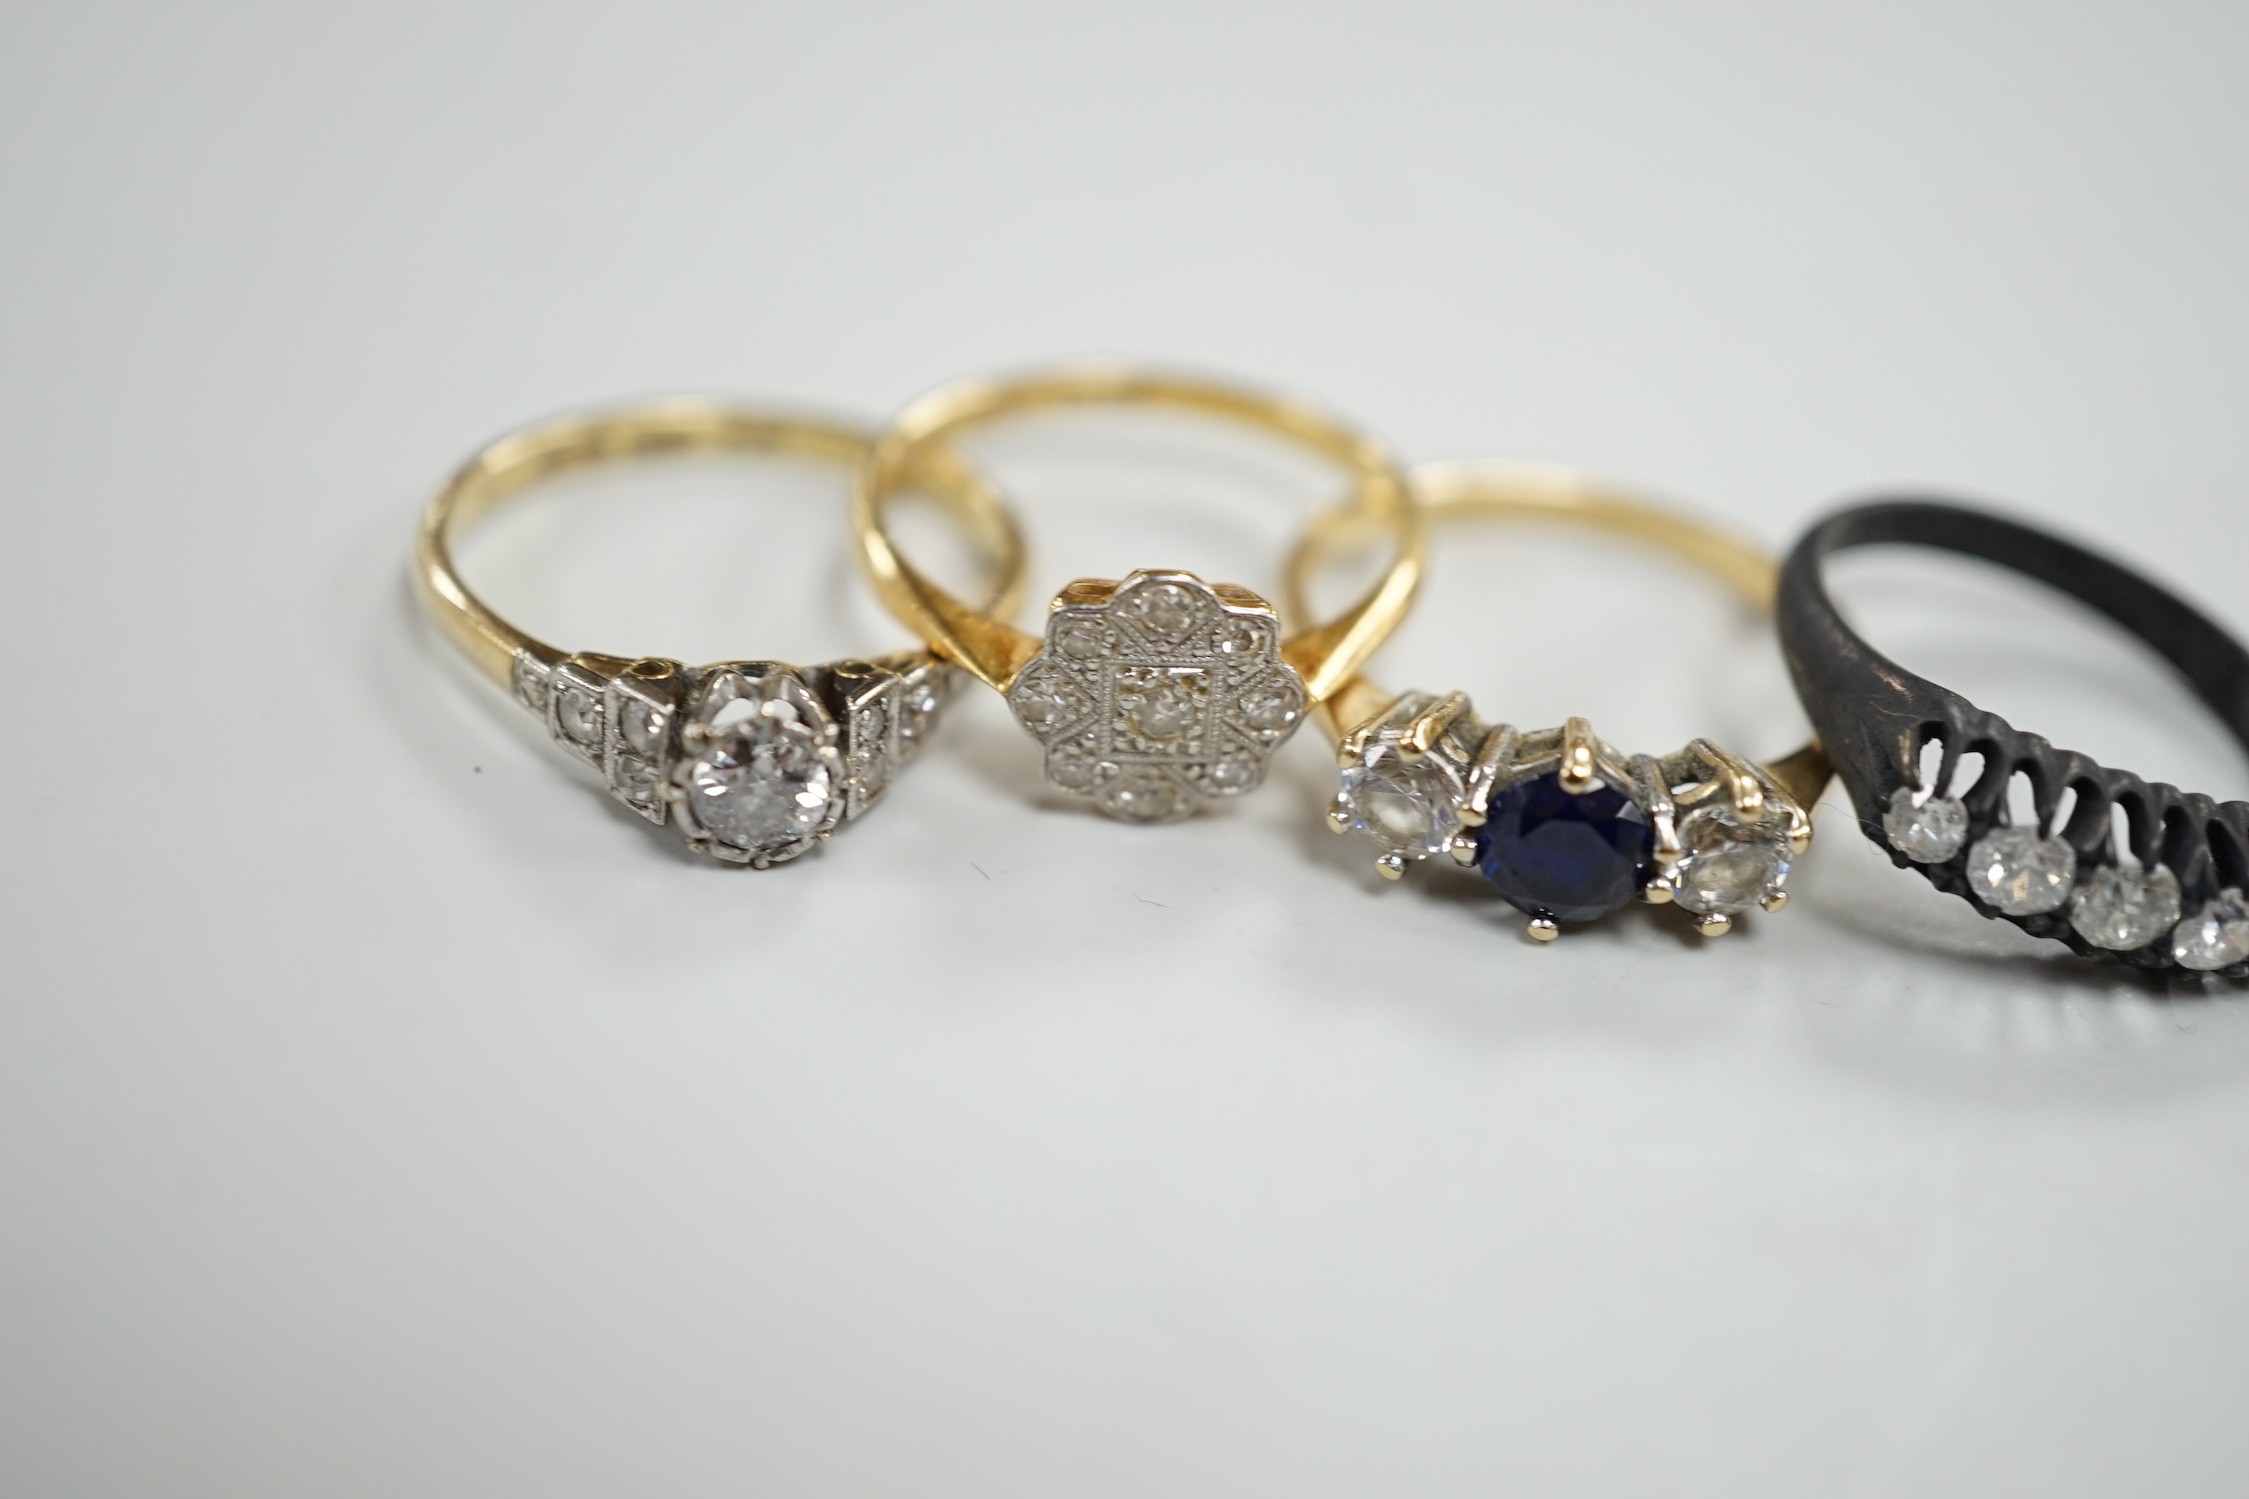 An 18ct, plat and single stone diamond ring, with diamond set shoulders, size O, a similar diamond cluster ring, size N, a blackened? 18ct gold and five stone diamond ring, a late Victorian diamond set heart shaped mourn